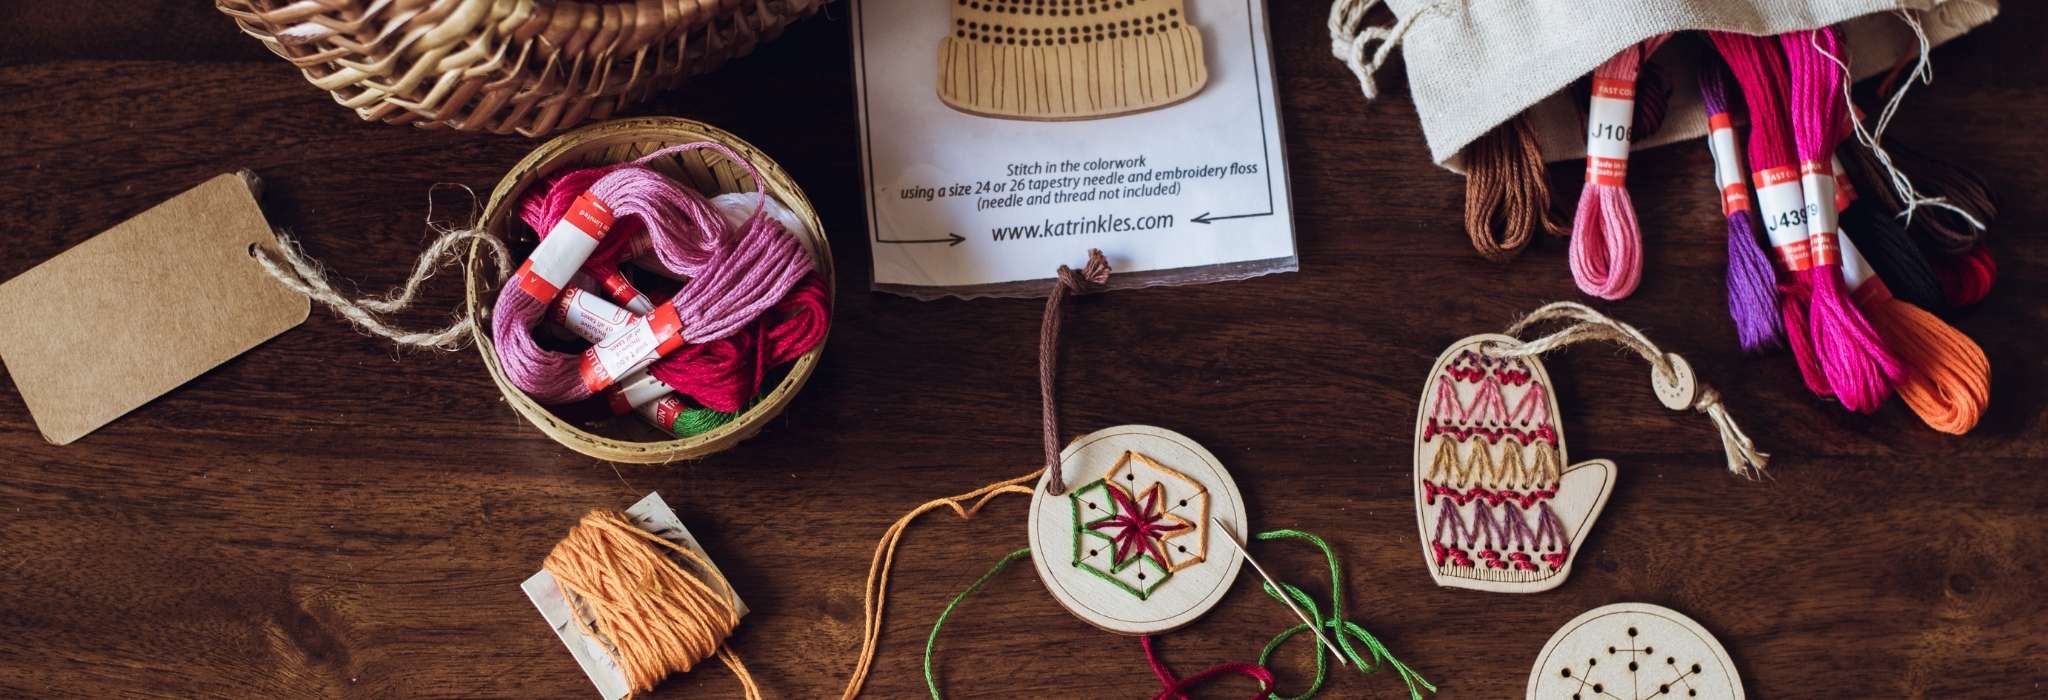 Wooden stitchable ornaments lie on a wooden surface, with stitching done in brightly coloured thread. A pile of threads and a wicker basket lie next to them.